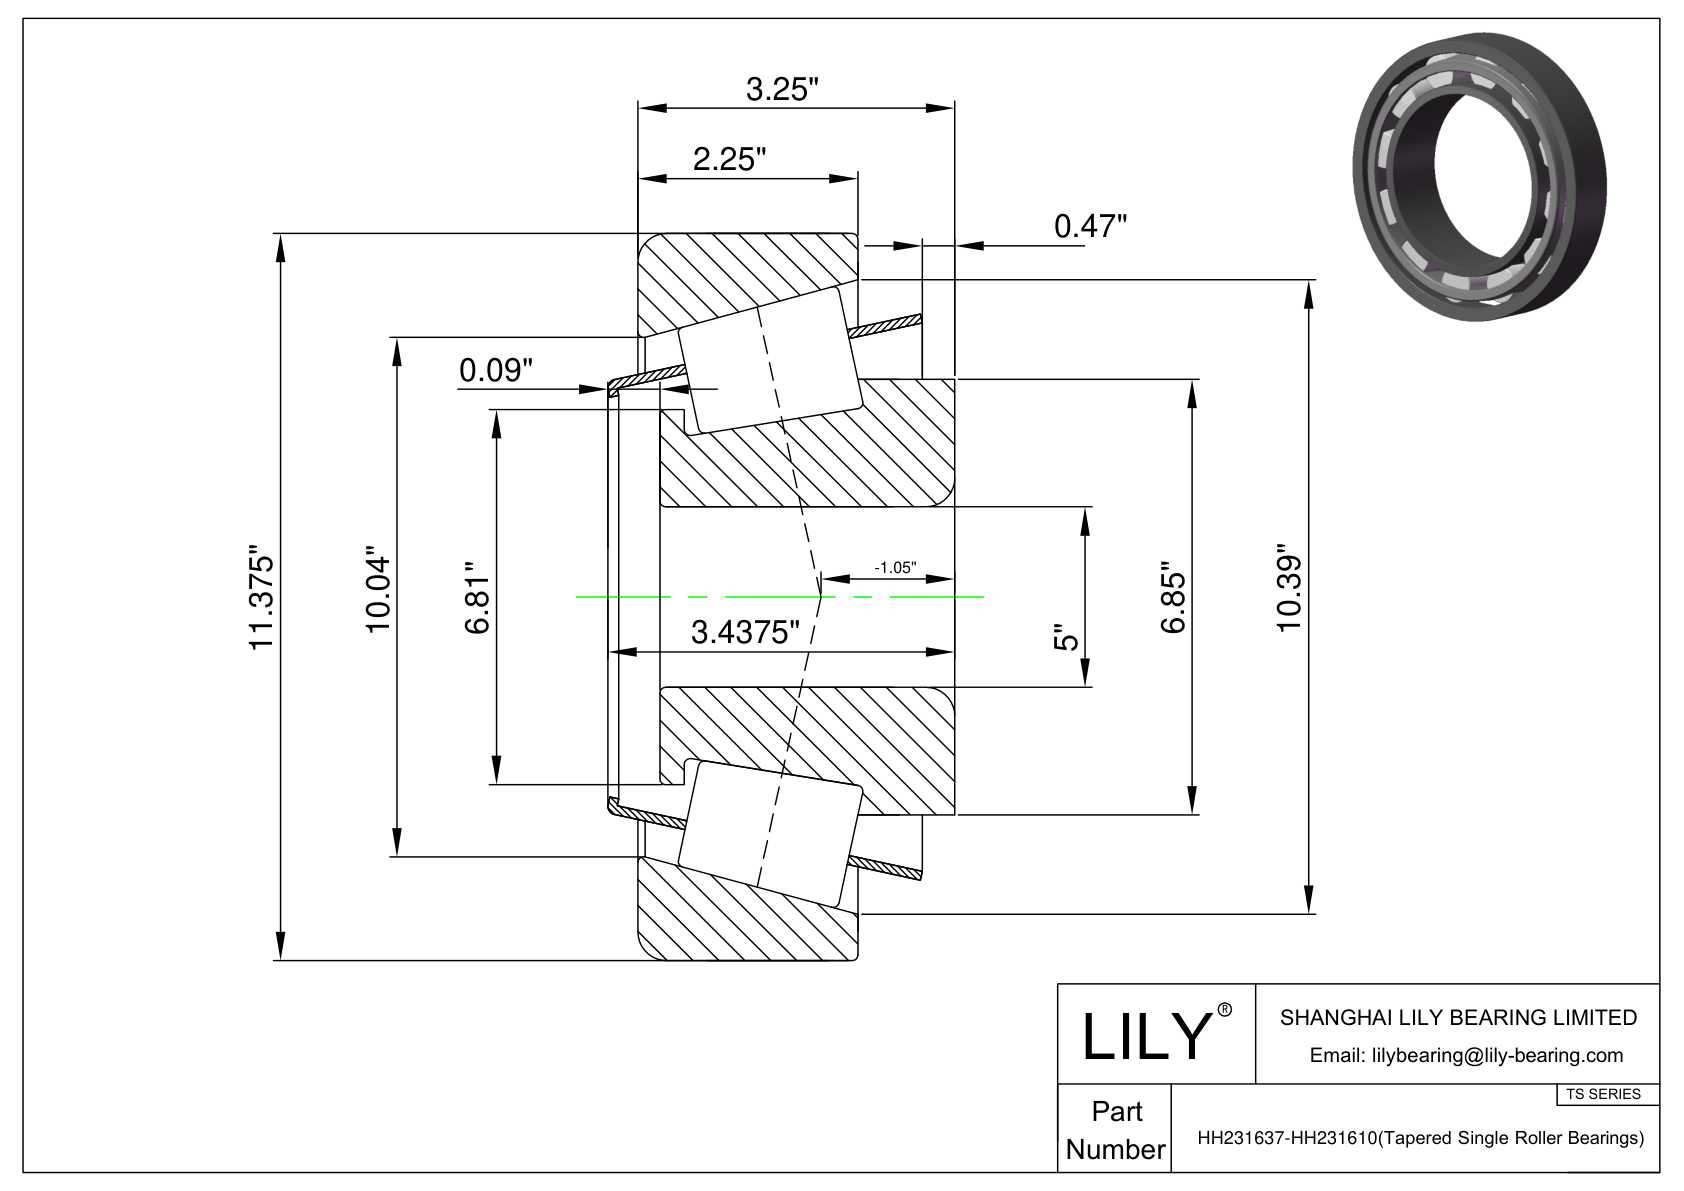 HH231637-HH231610 TS (Tapered Single Roller Bearings) (Imperial) cad drawing